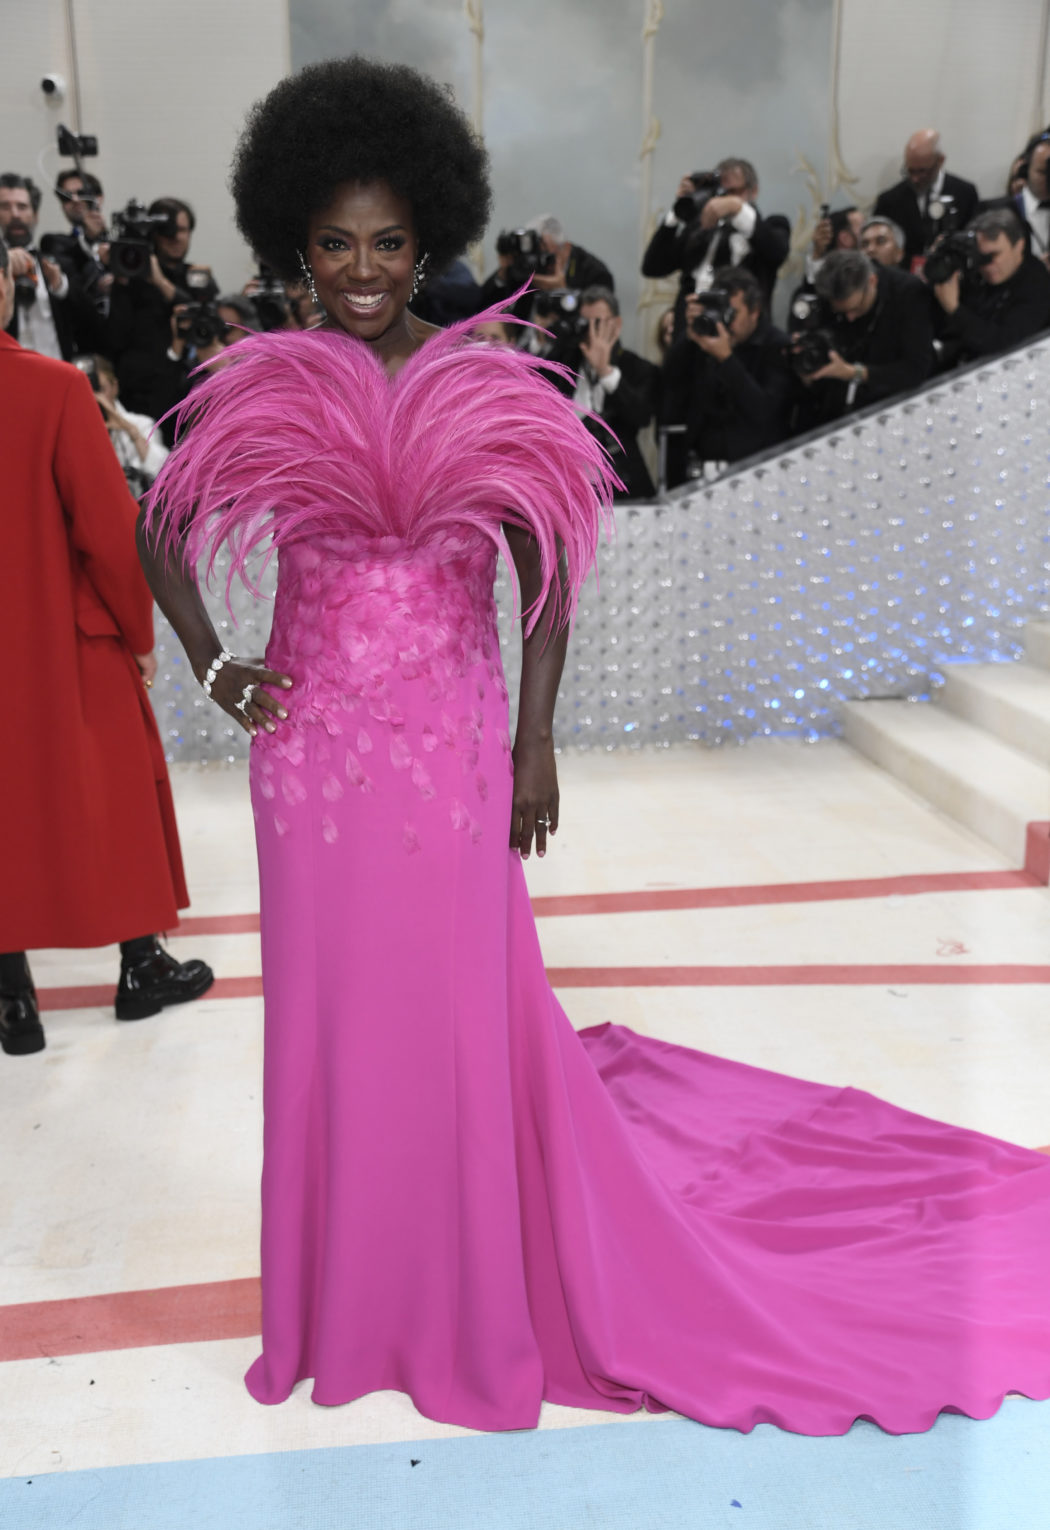 Viola Davis attends The Metropolitan Museum of Art’s Costume Institute benefit gala celebrating the opening of the “Karl Lagerfeld: A Line of Beauty” exhibition on Monday, May 1, 2023, in New York. (Photo by Evan Agostini/Invision/AP)

Associated Press/LaPresse
Only Italy and Spain